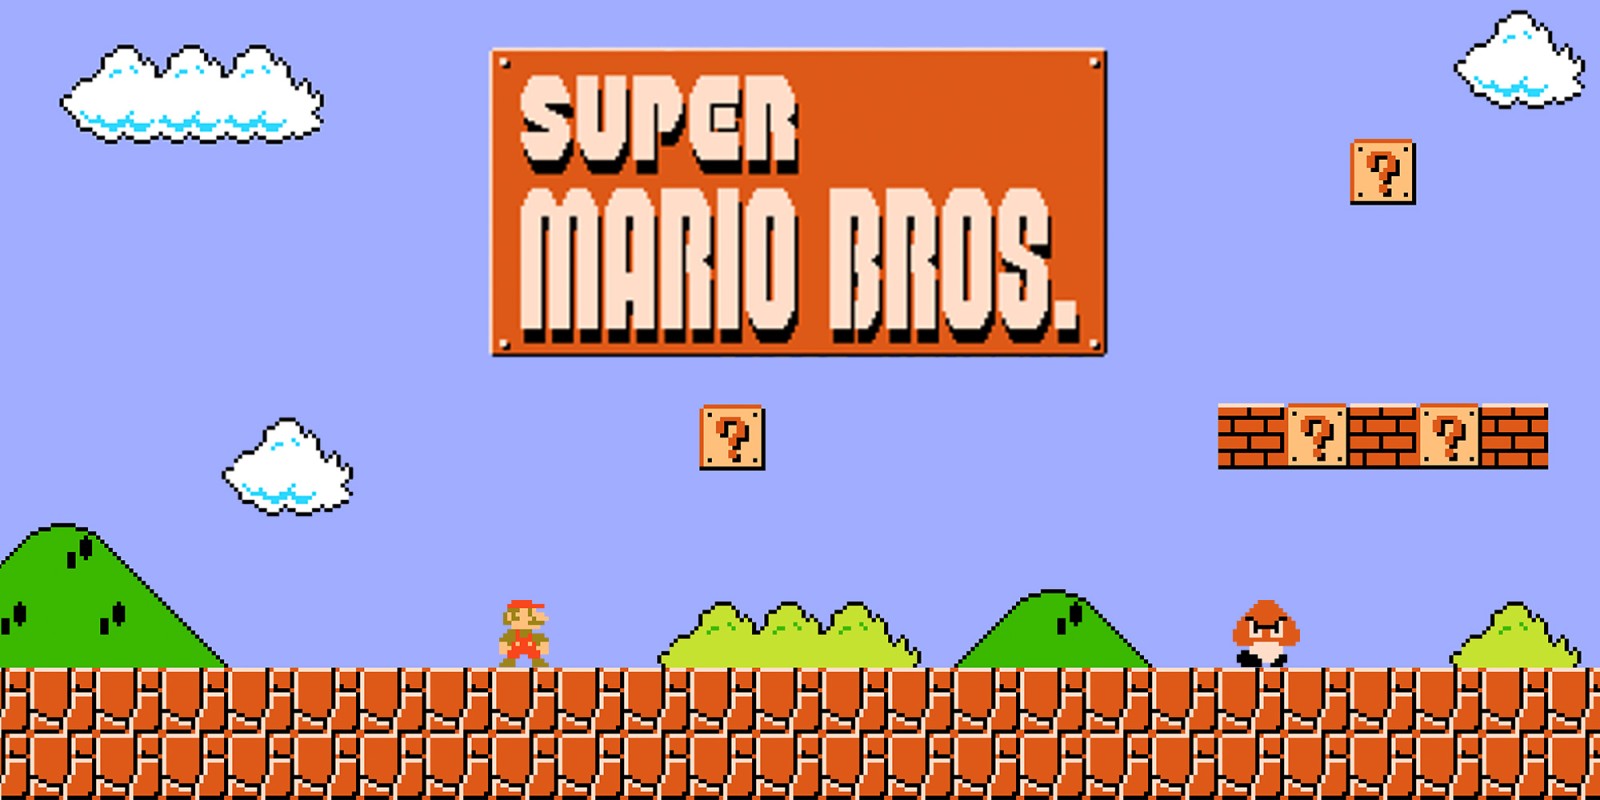 Super Mario Bros - Most Downloaded PC Video Games in the World